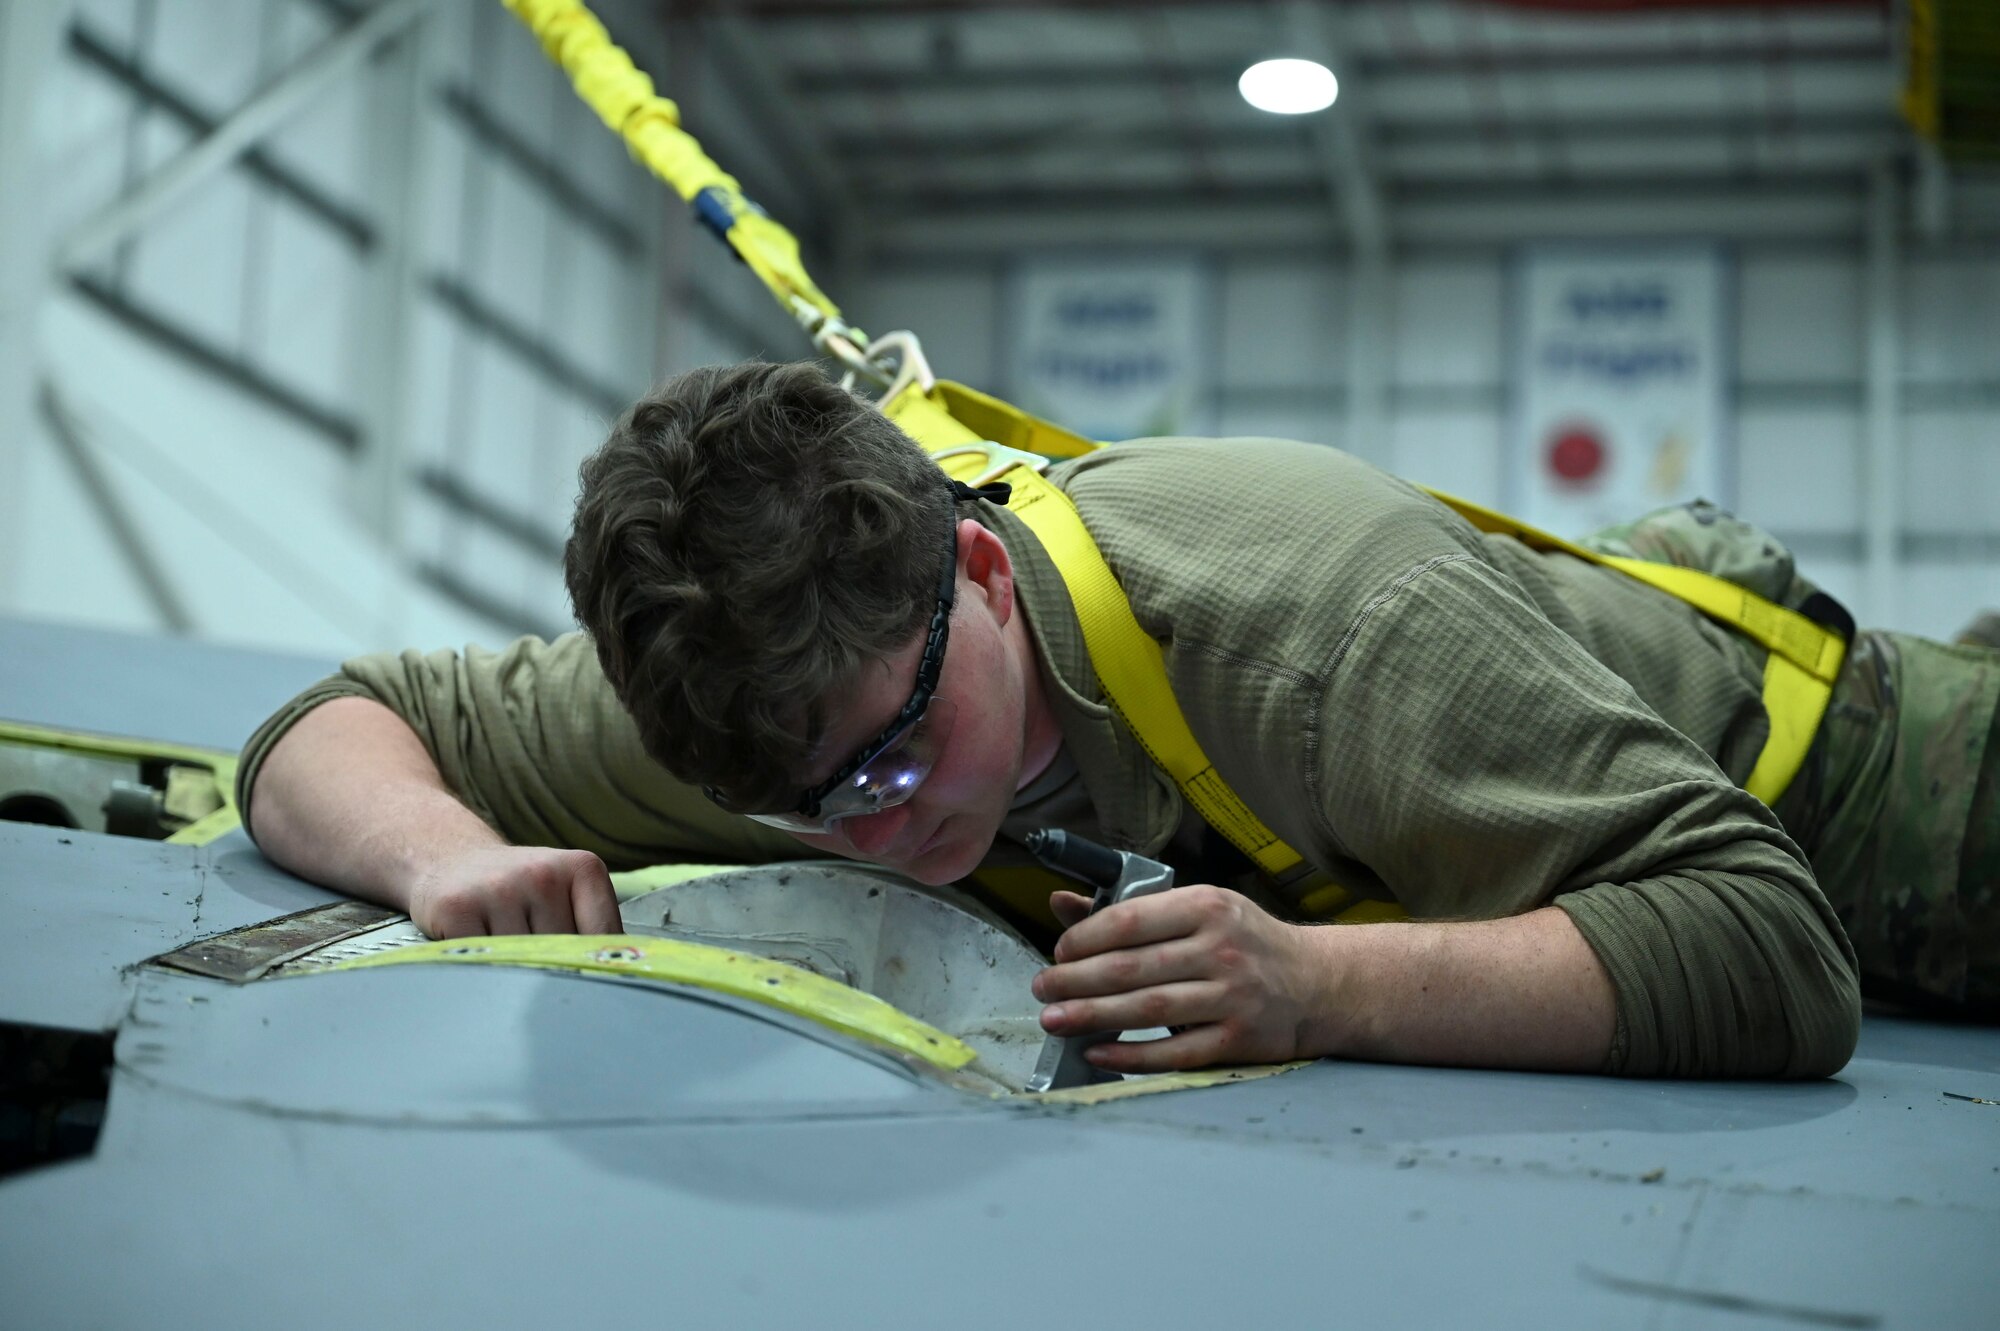 Maintainers must wear a safety harness while working on the wing of a jet to prevent injury in the case they fall from the wing.